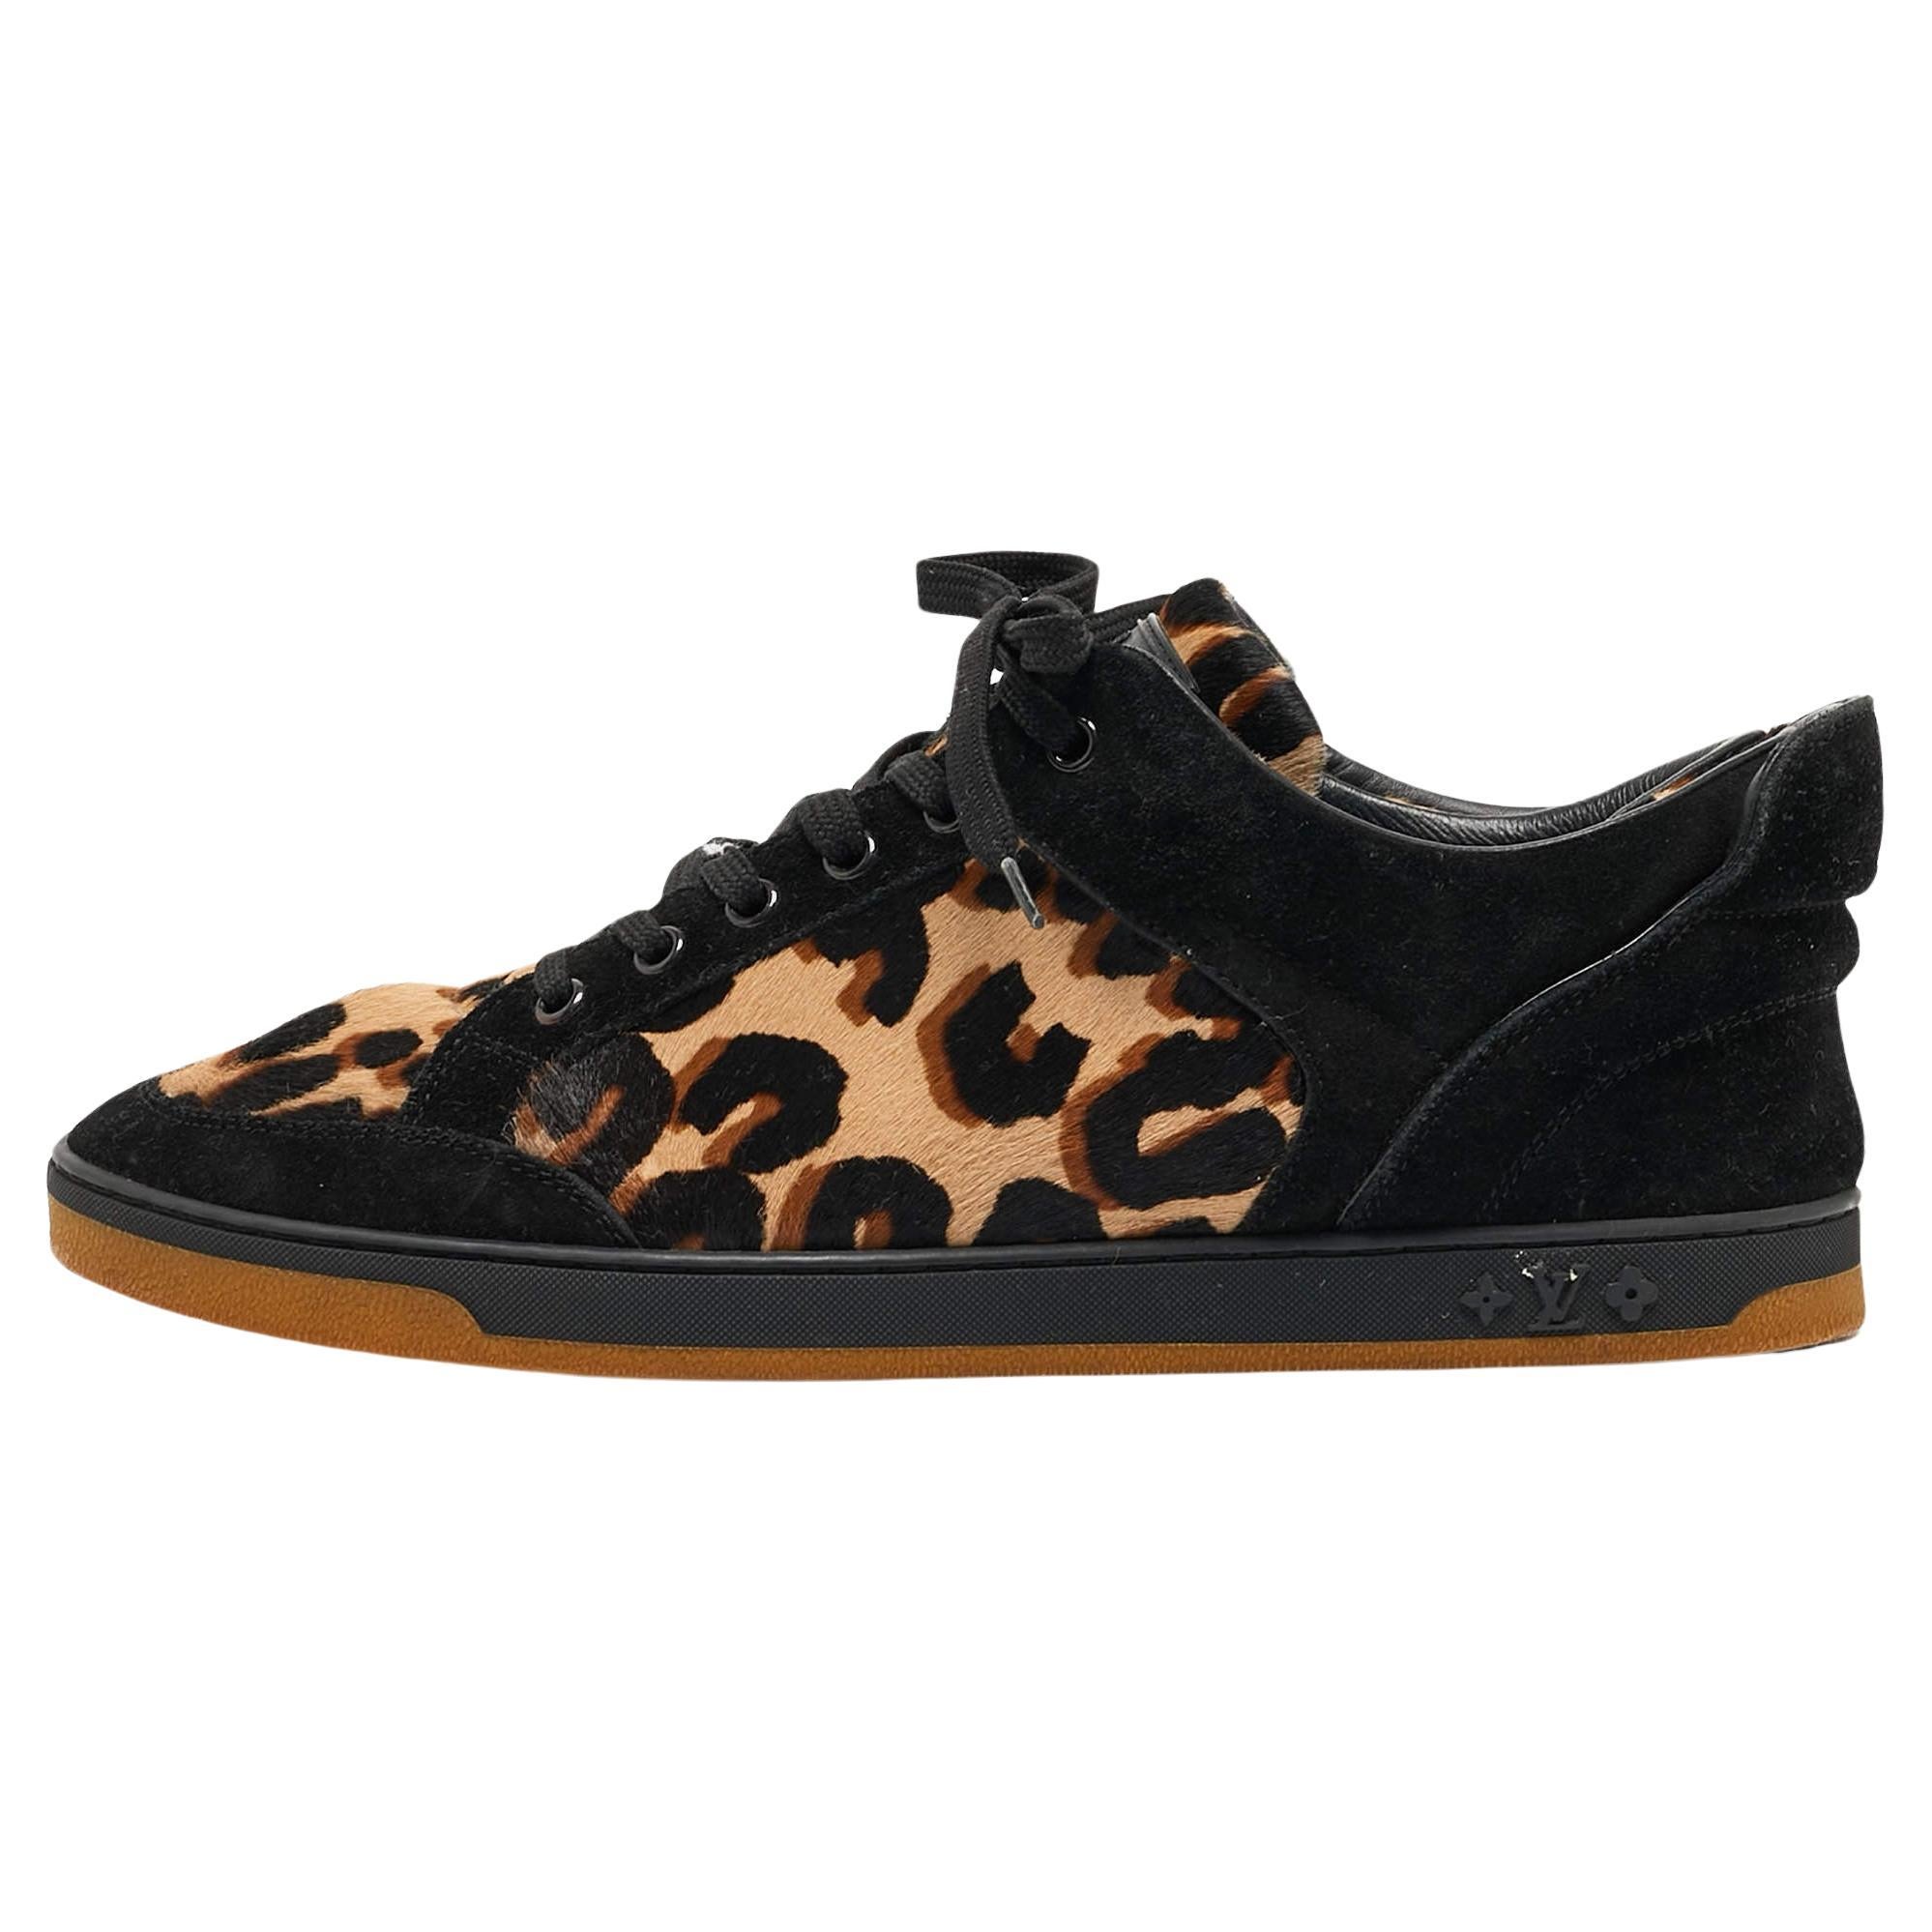 Louis Vuitton Black/Brown Calf Hair and Suede Low Top Sneakers Size 38.5 For Sale